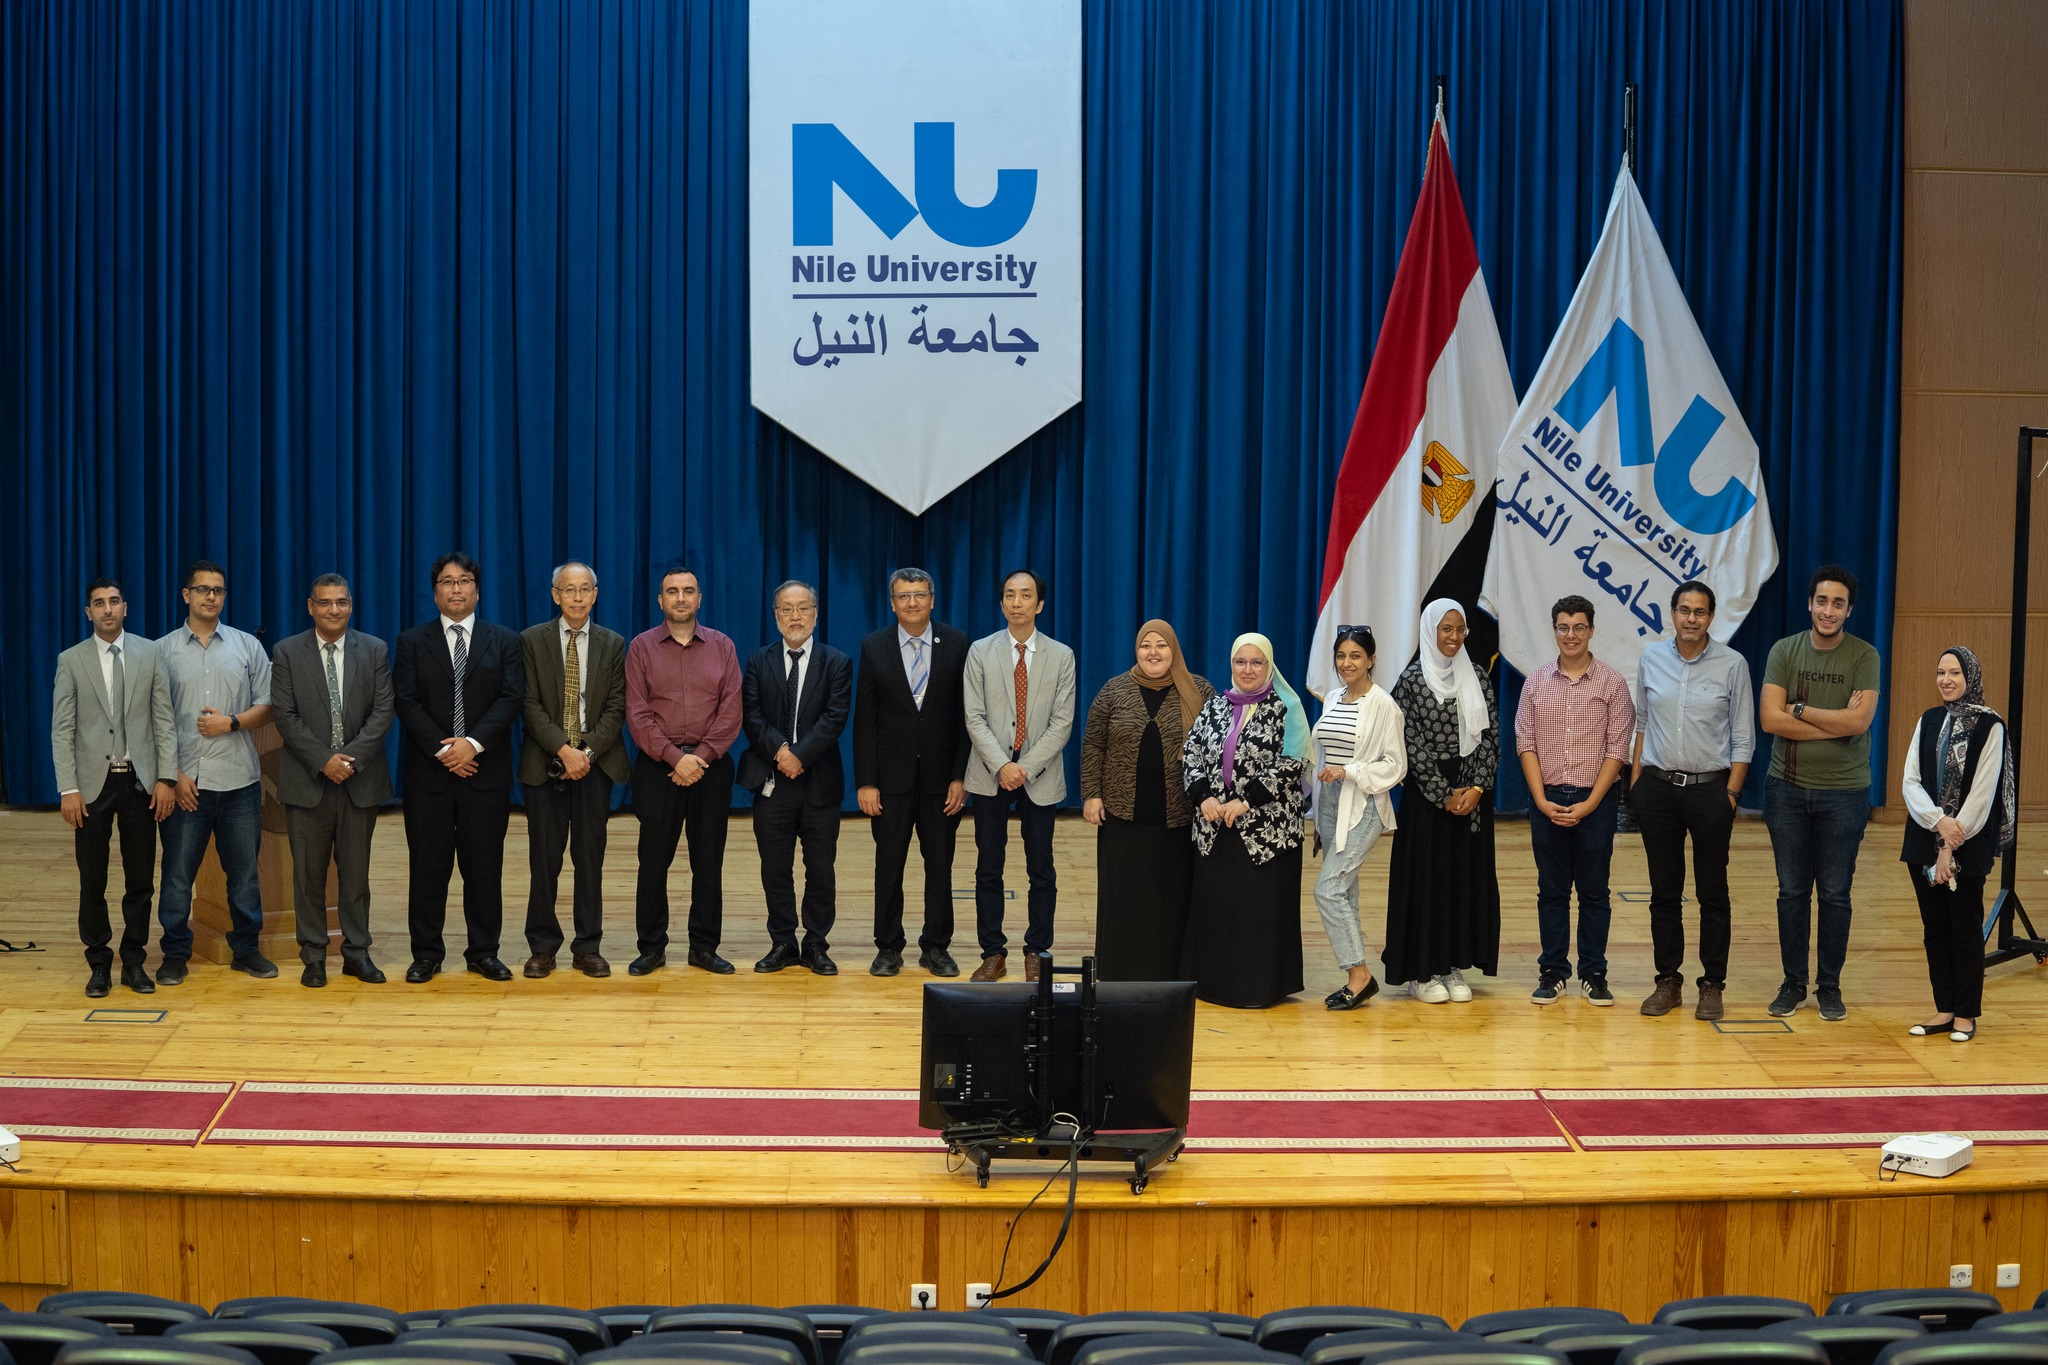 Visit from Egypt-Japan University for Science and Technology (E-JUST) to Nile University